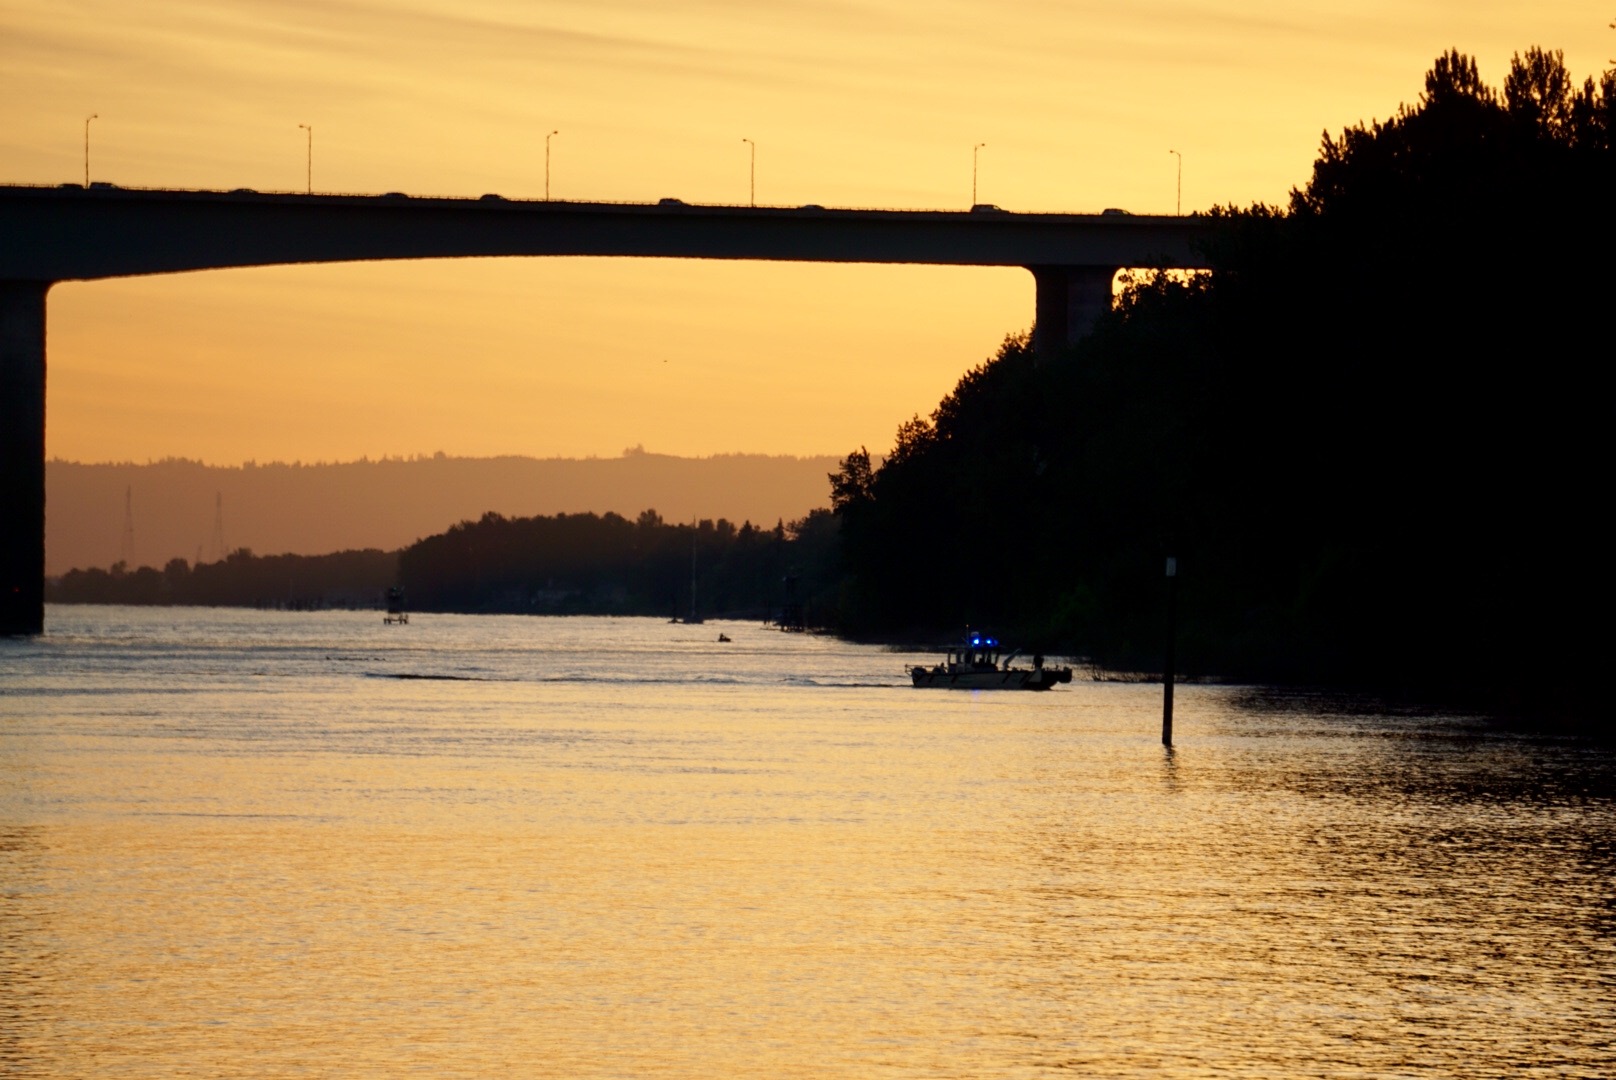 A rescue boat works at the scene of a fatal accident on the Columbia River Monday evening. A woman was killed and a man was injured when their boat struck a bridge pier and sank.